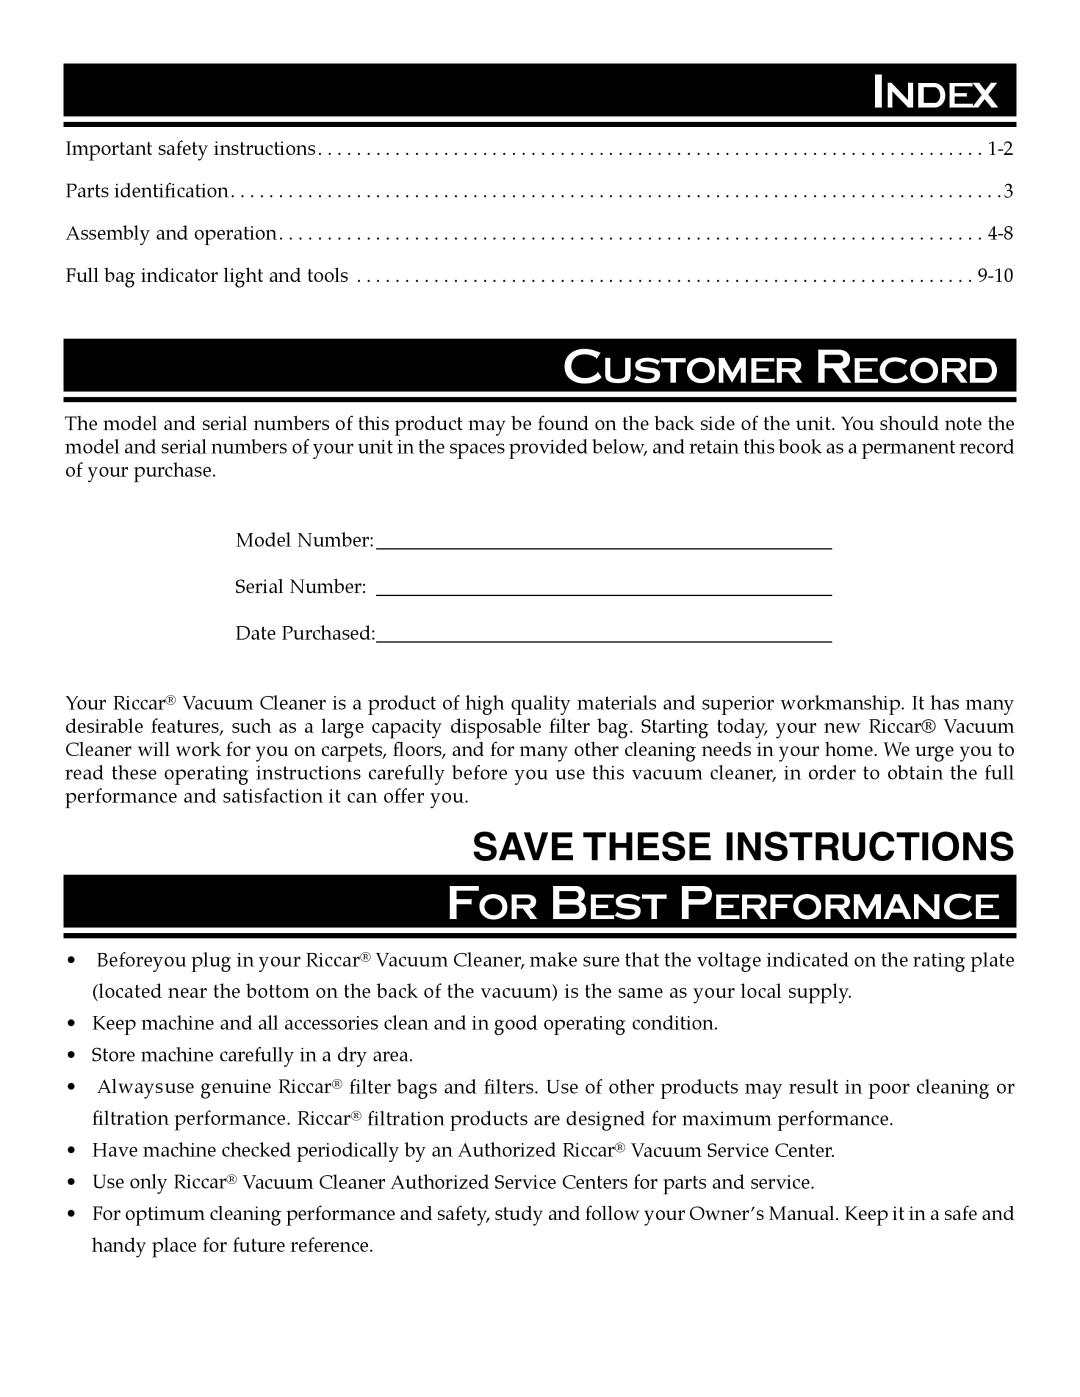 Riccar 4000 manual Index, Customer Record, For Best Performance, Save These Instructions 